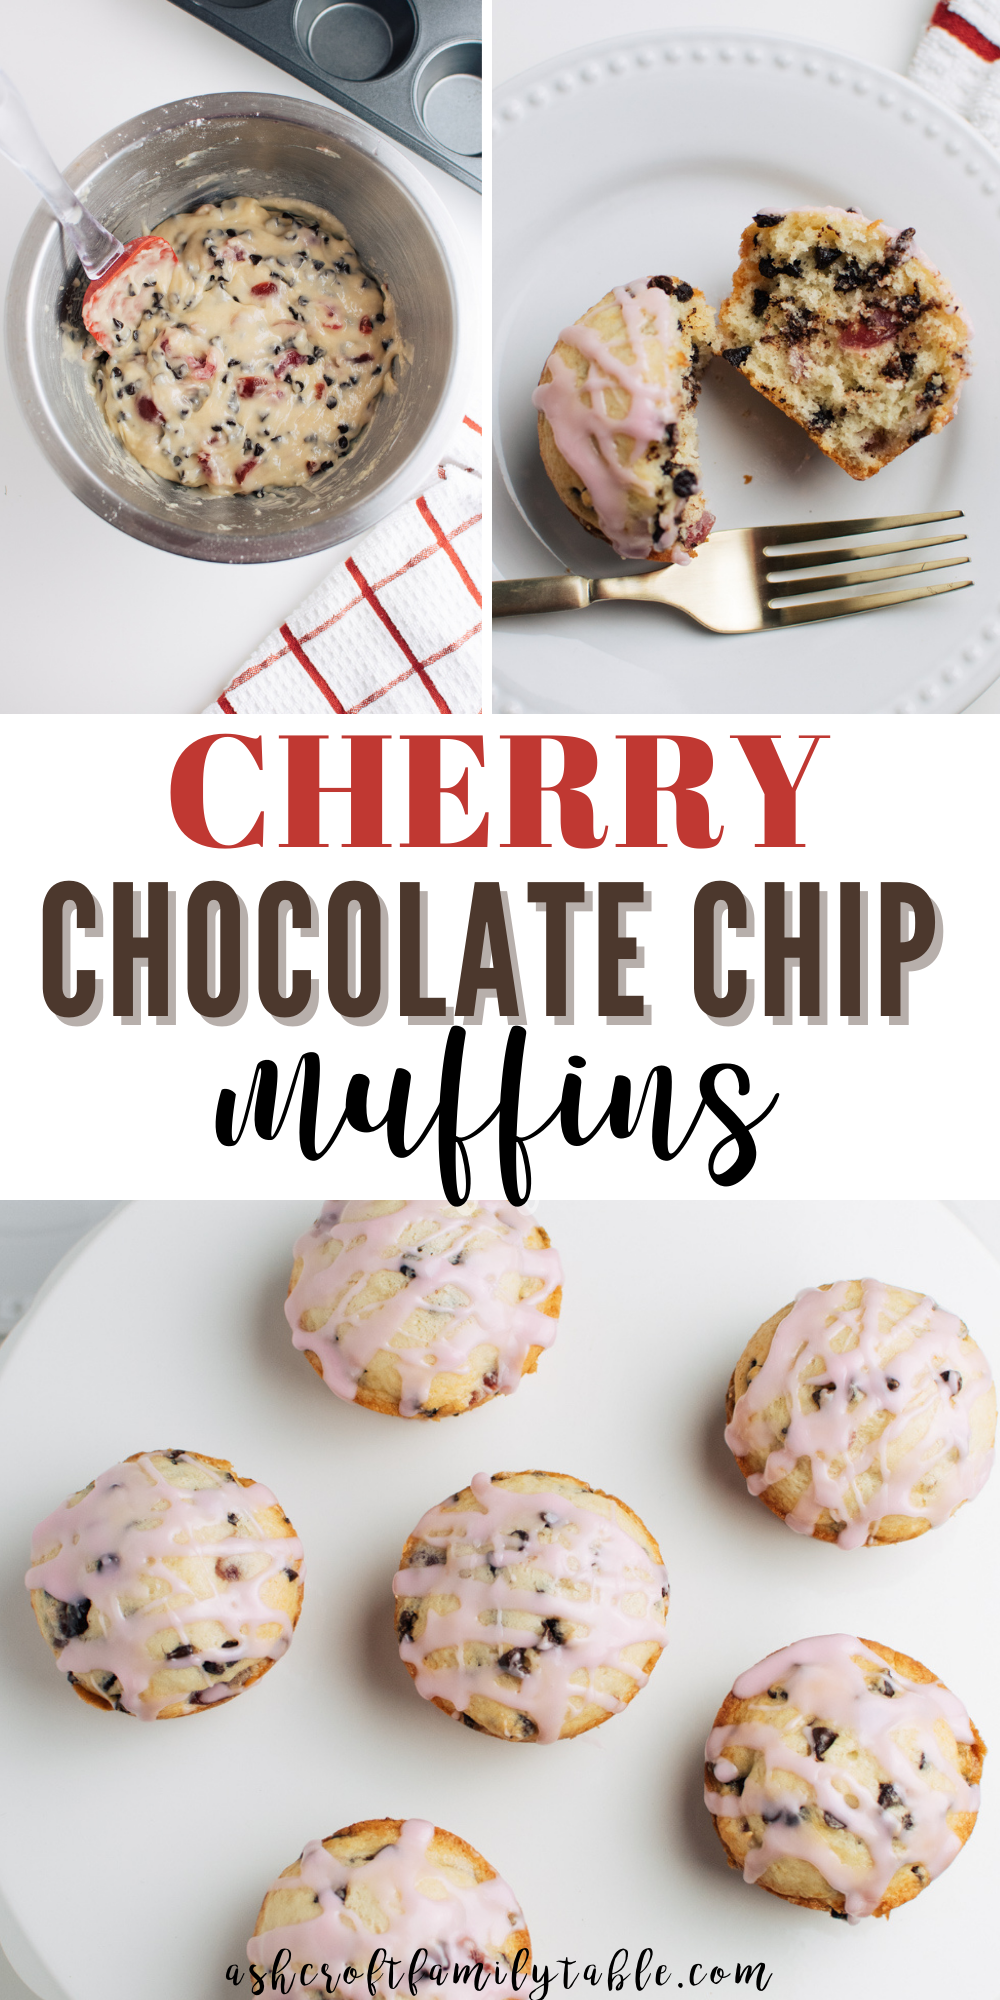 Make these yummy cherry chocolate chip muffins for your Valentine's Day breakfast!